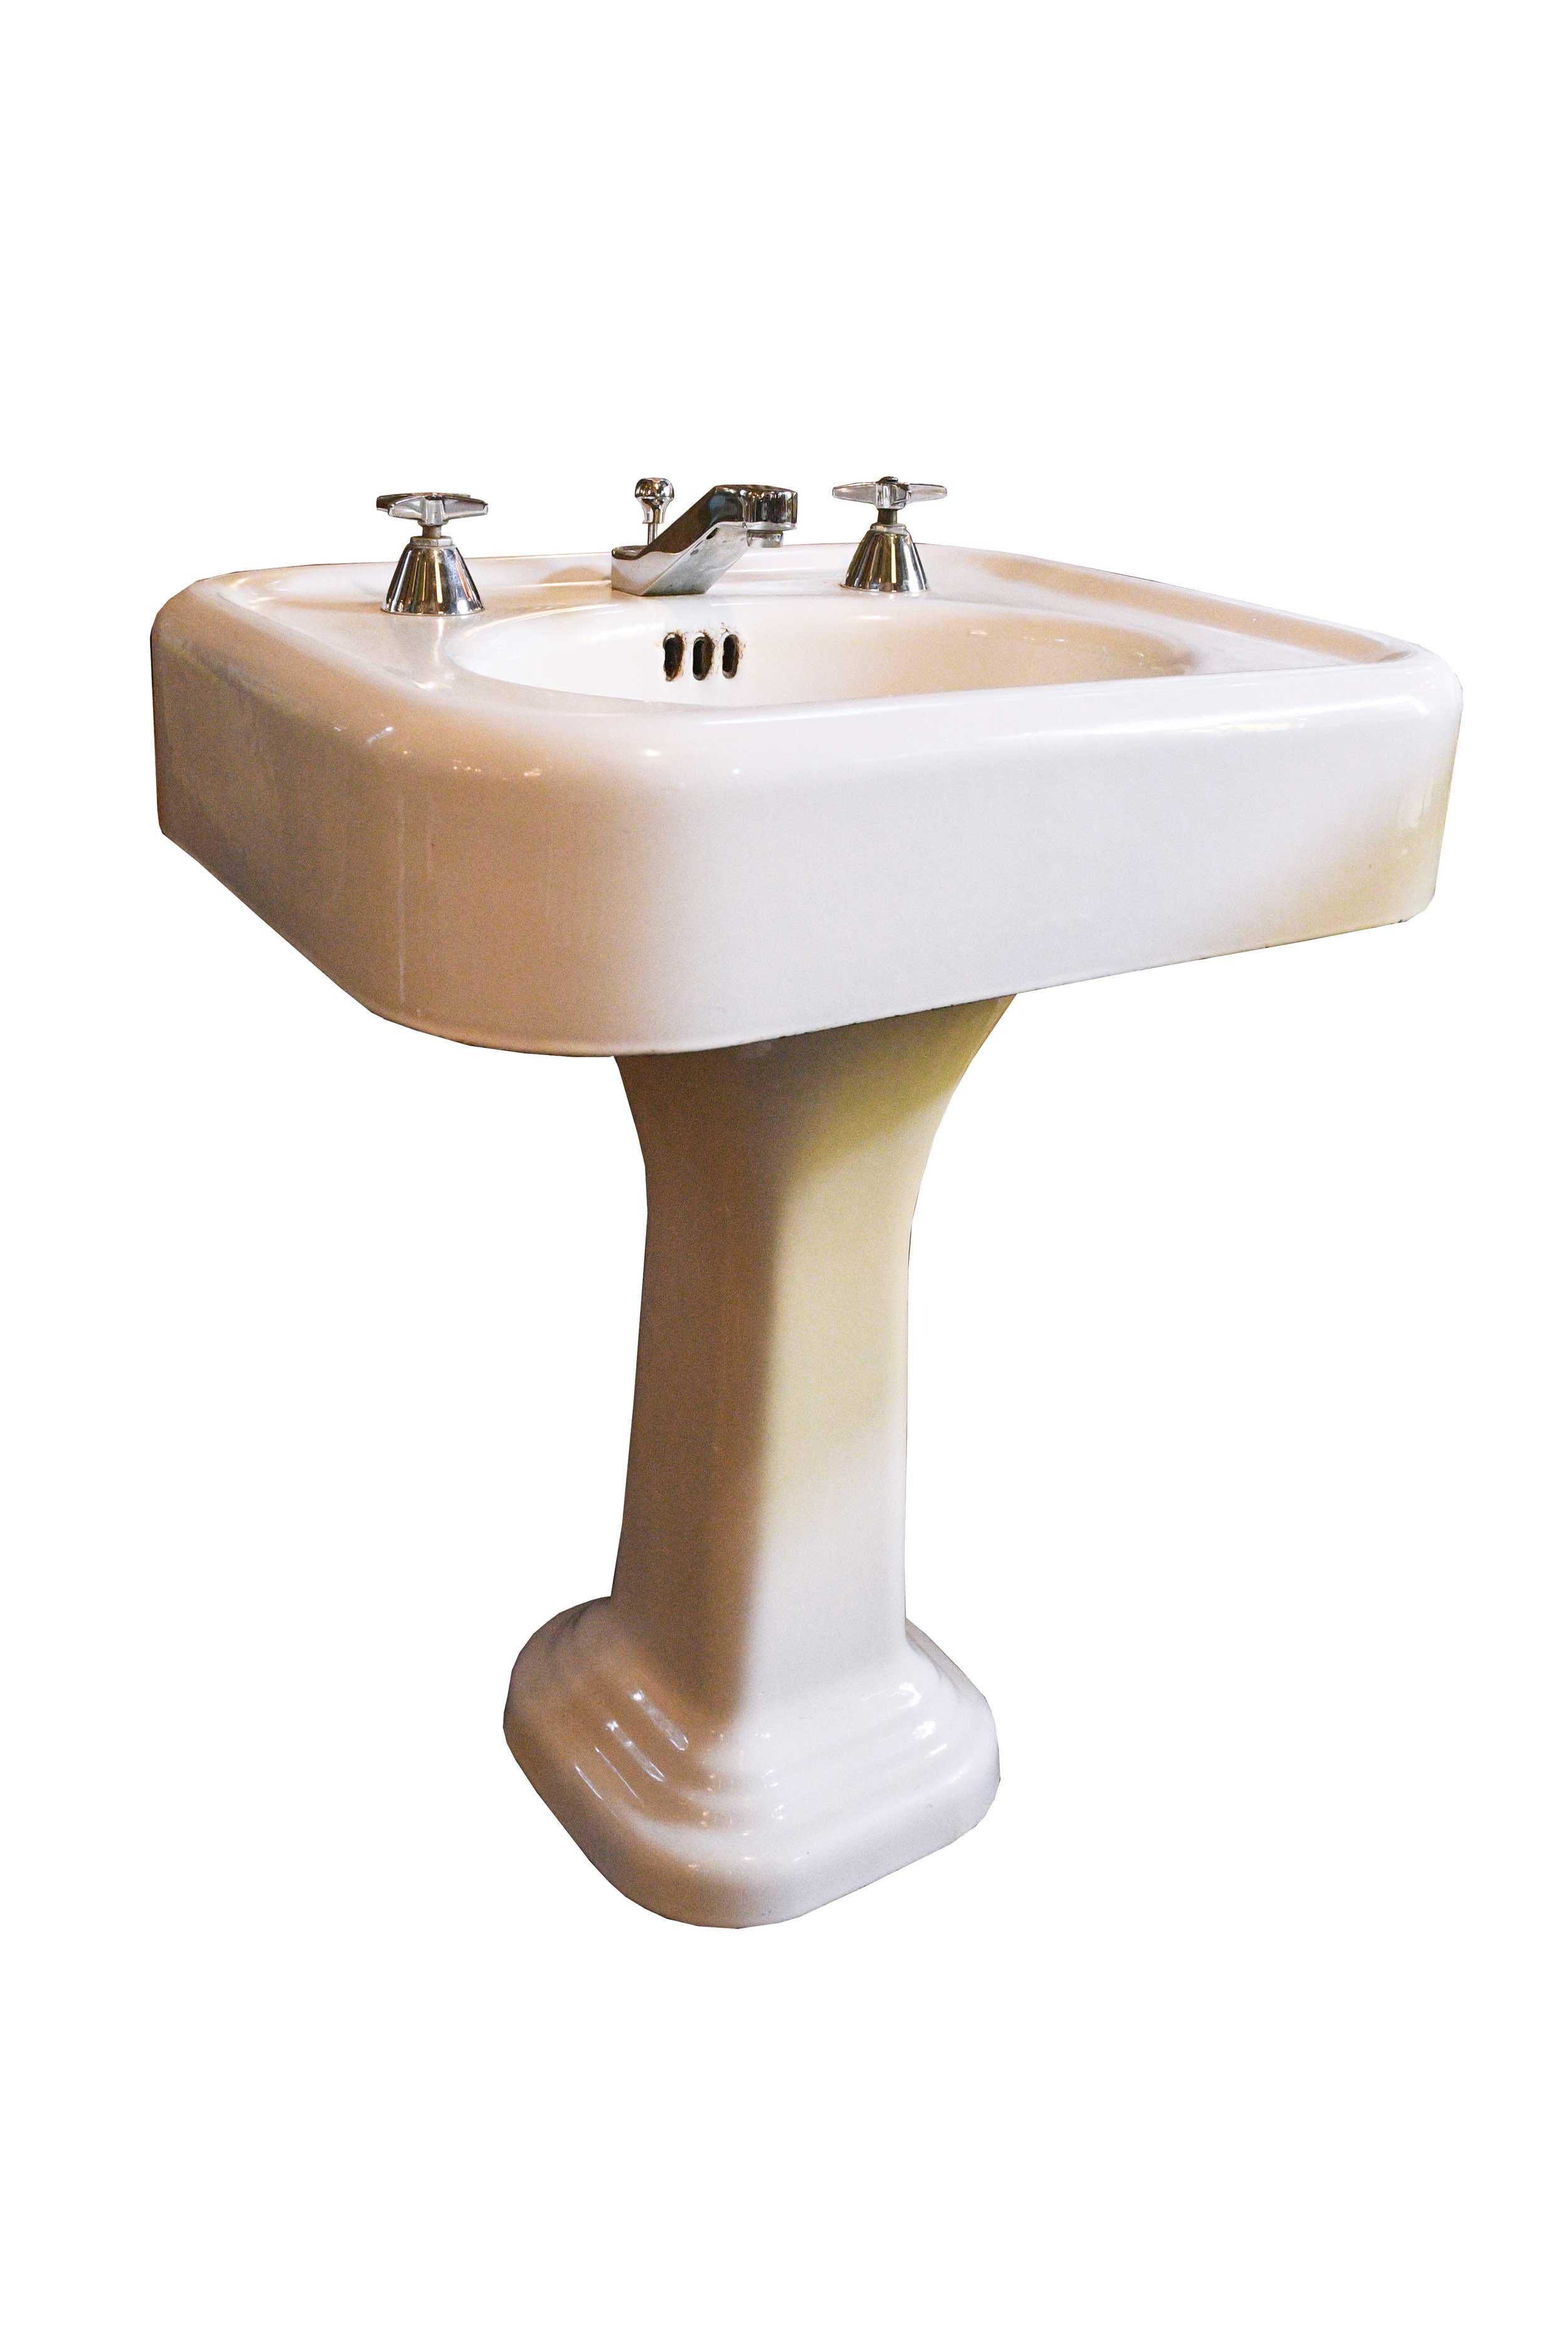 A classic pedestal sink. With rounded edges and a sturdy base, this 1920’s sink can be utilized in many different settings,

circa 1925.
Condition: Good
Finish: Original
Country of origin: USA.